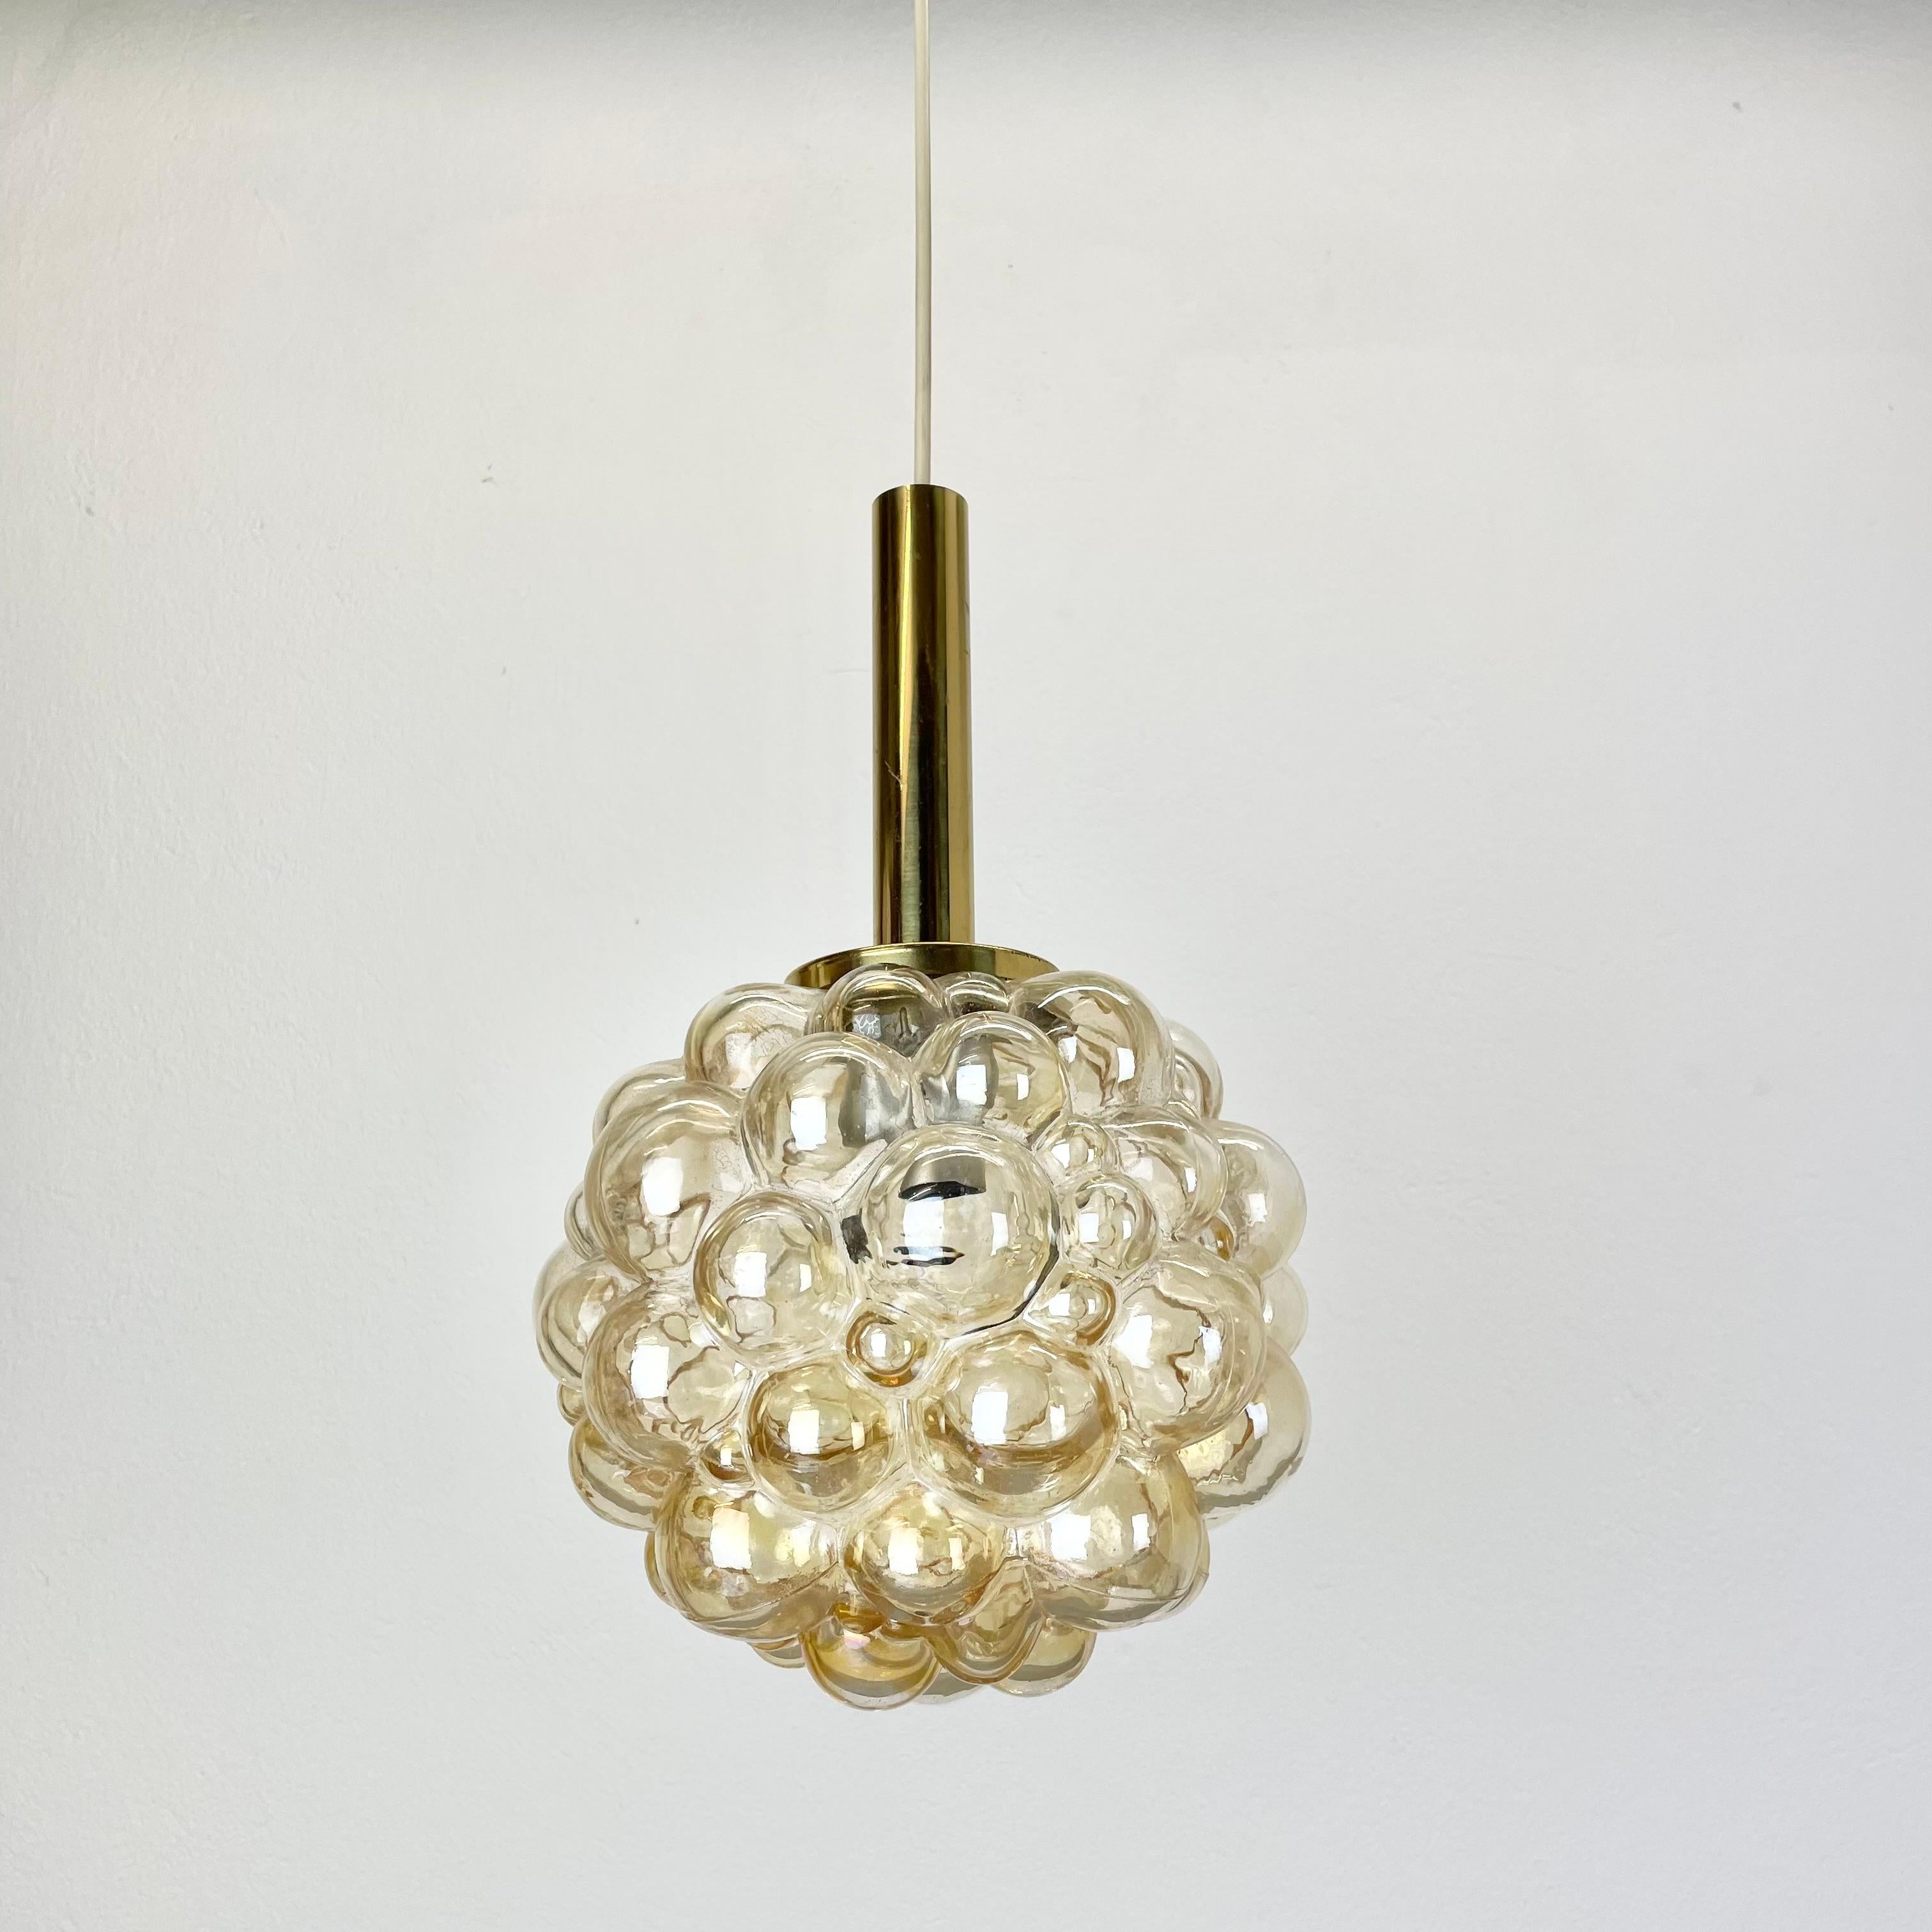 Article:

hanging light



Producer: 

Glashütte Limburg, Germany


Design:

Helena Tynell


Origin: 

Germany


Age: 

1970s



Description: 

This fantastic glass hanging light was designed by Helena Tynell and produced in 1970s in Germany by